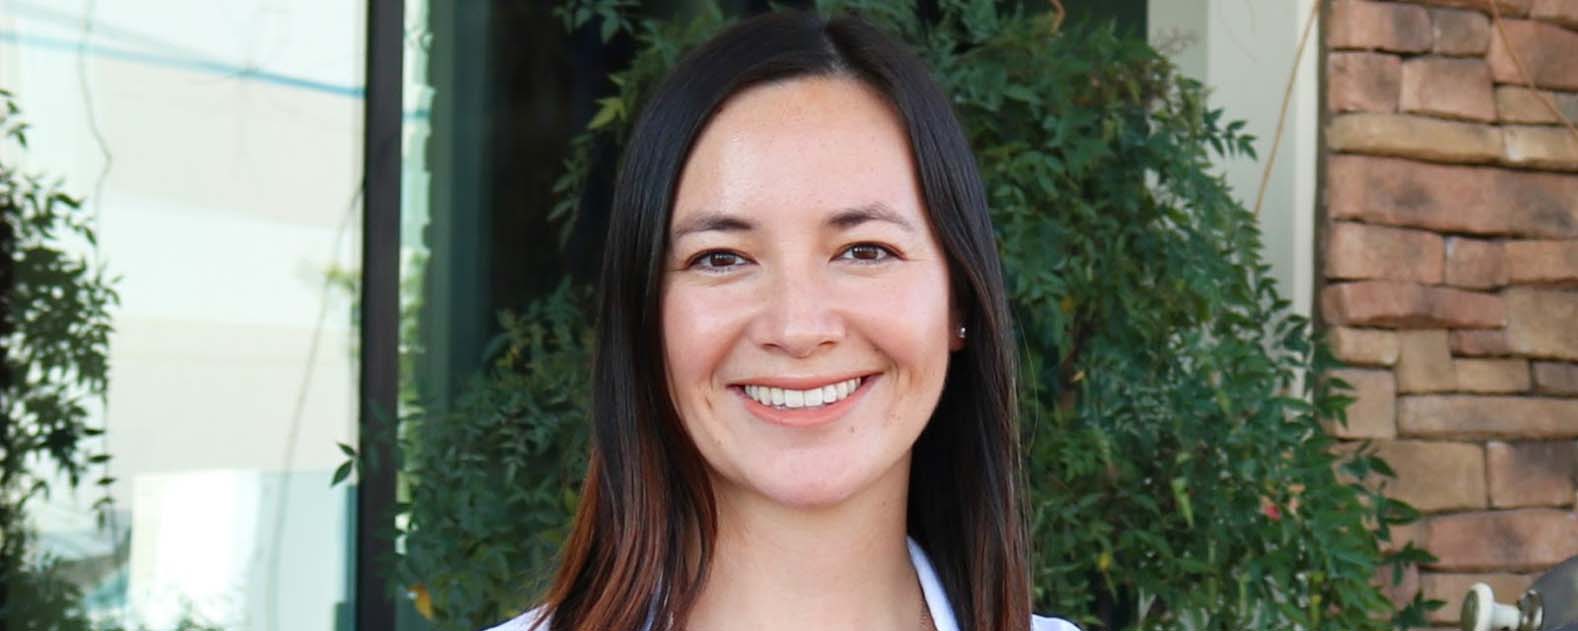 Meet Cassandra McDiarmid, a student in our College of Osteopathic Medicine